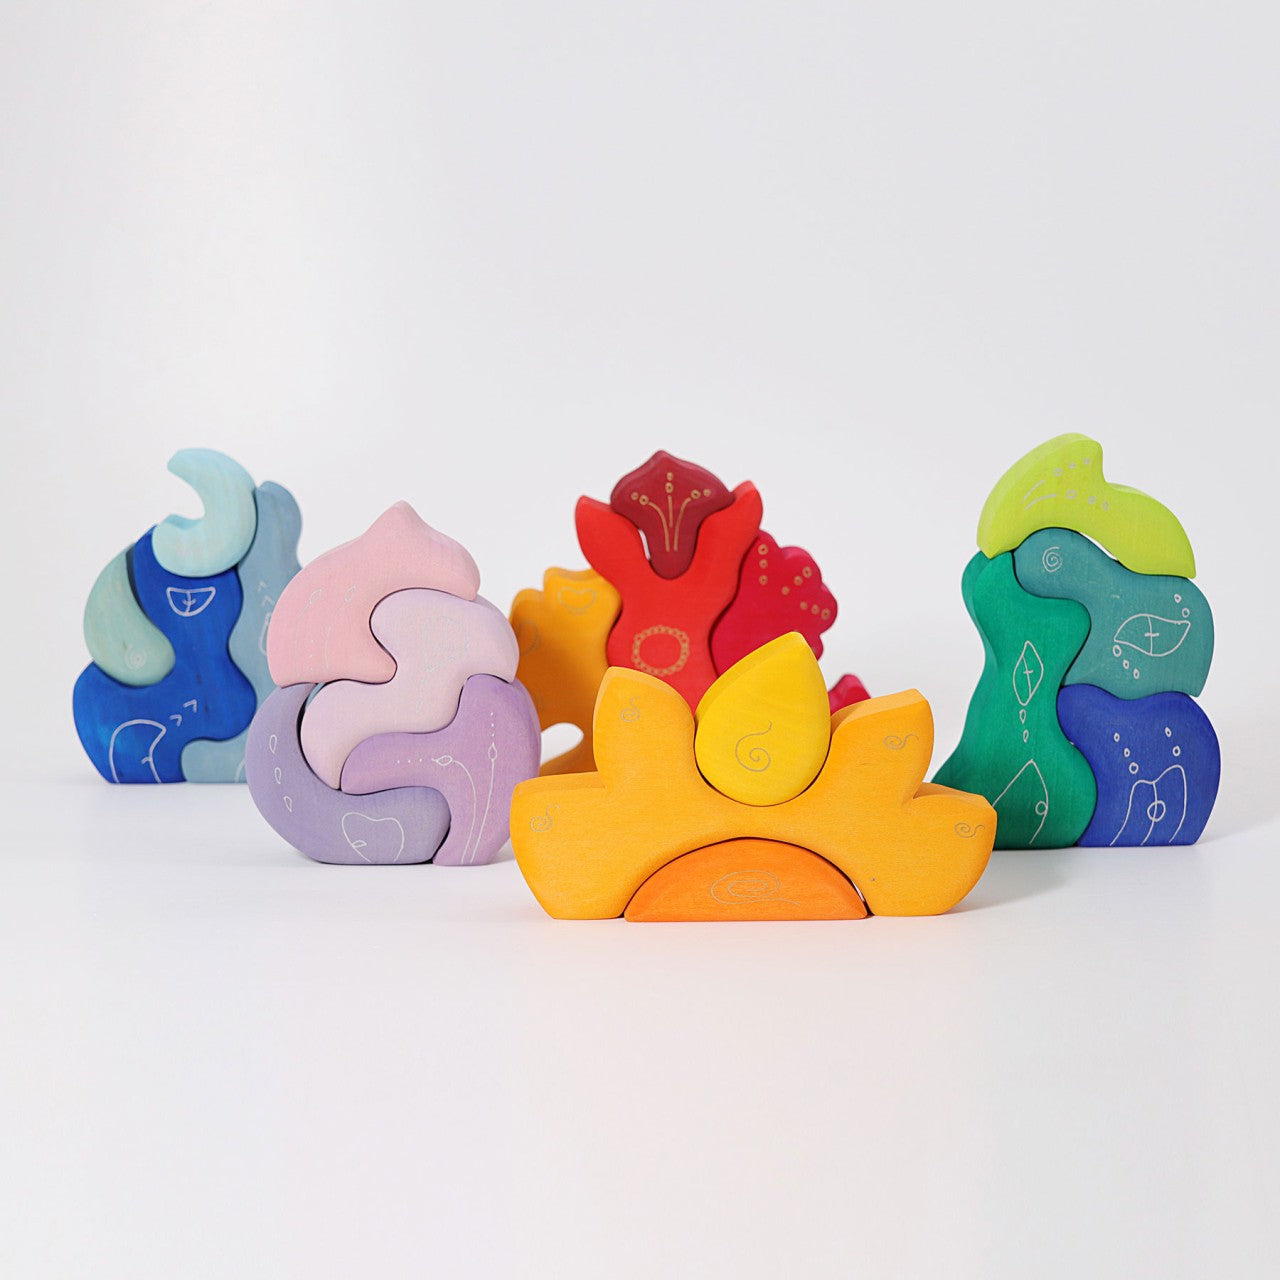 Casa Coral | 4 Pieces | Wooden Toys for Kids | Open-Ended Play